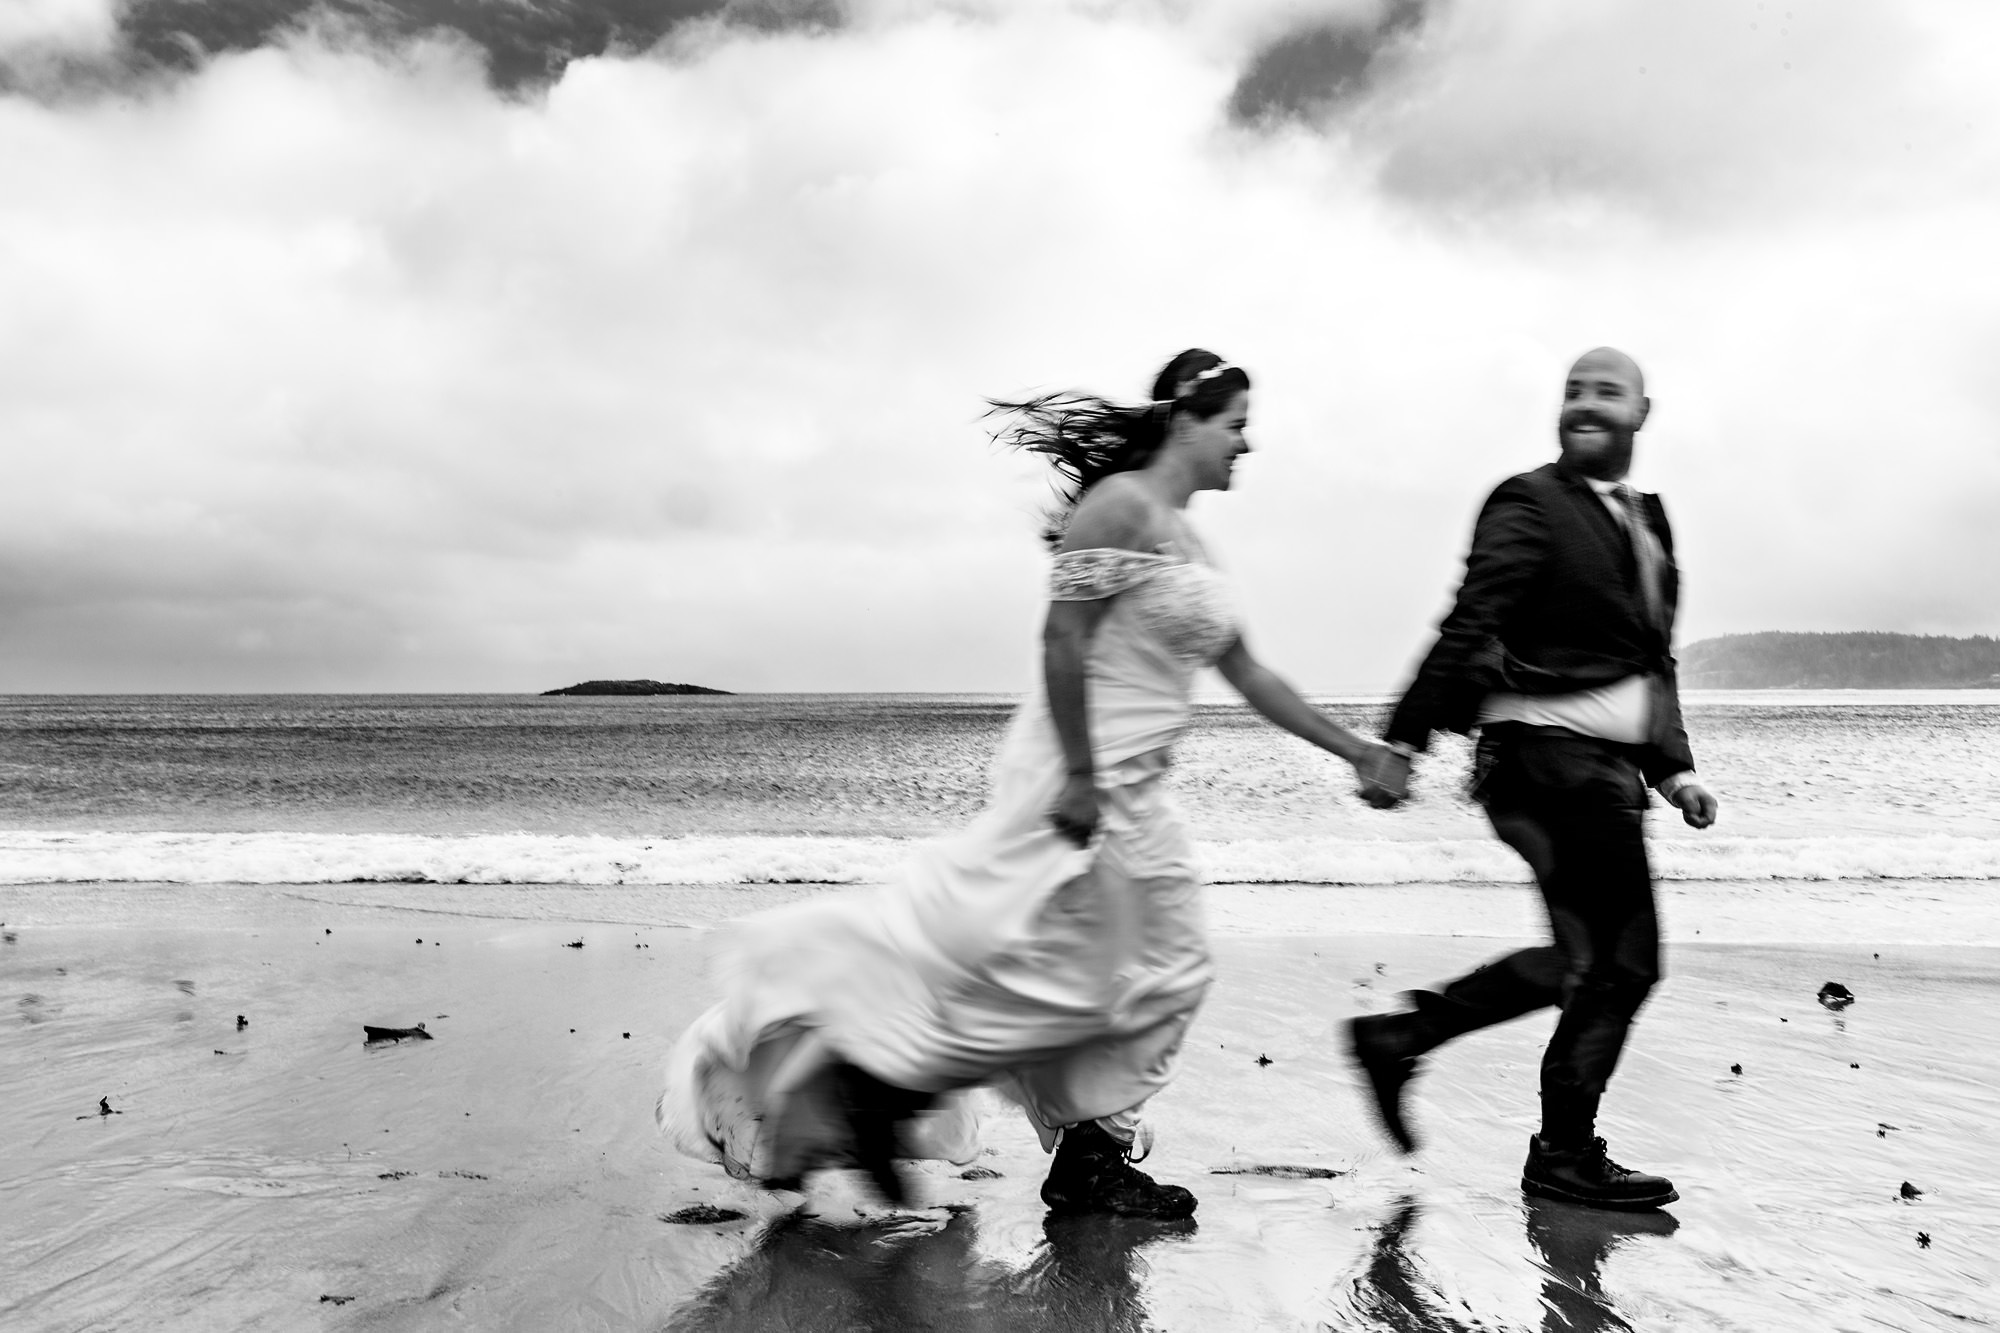 Elopement portraits at Sand Beach in Acadia National Park